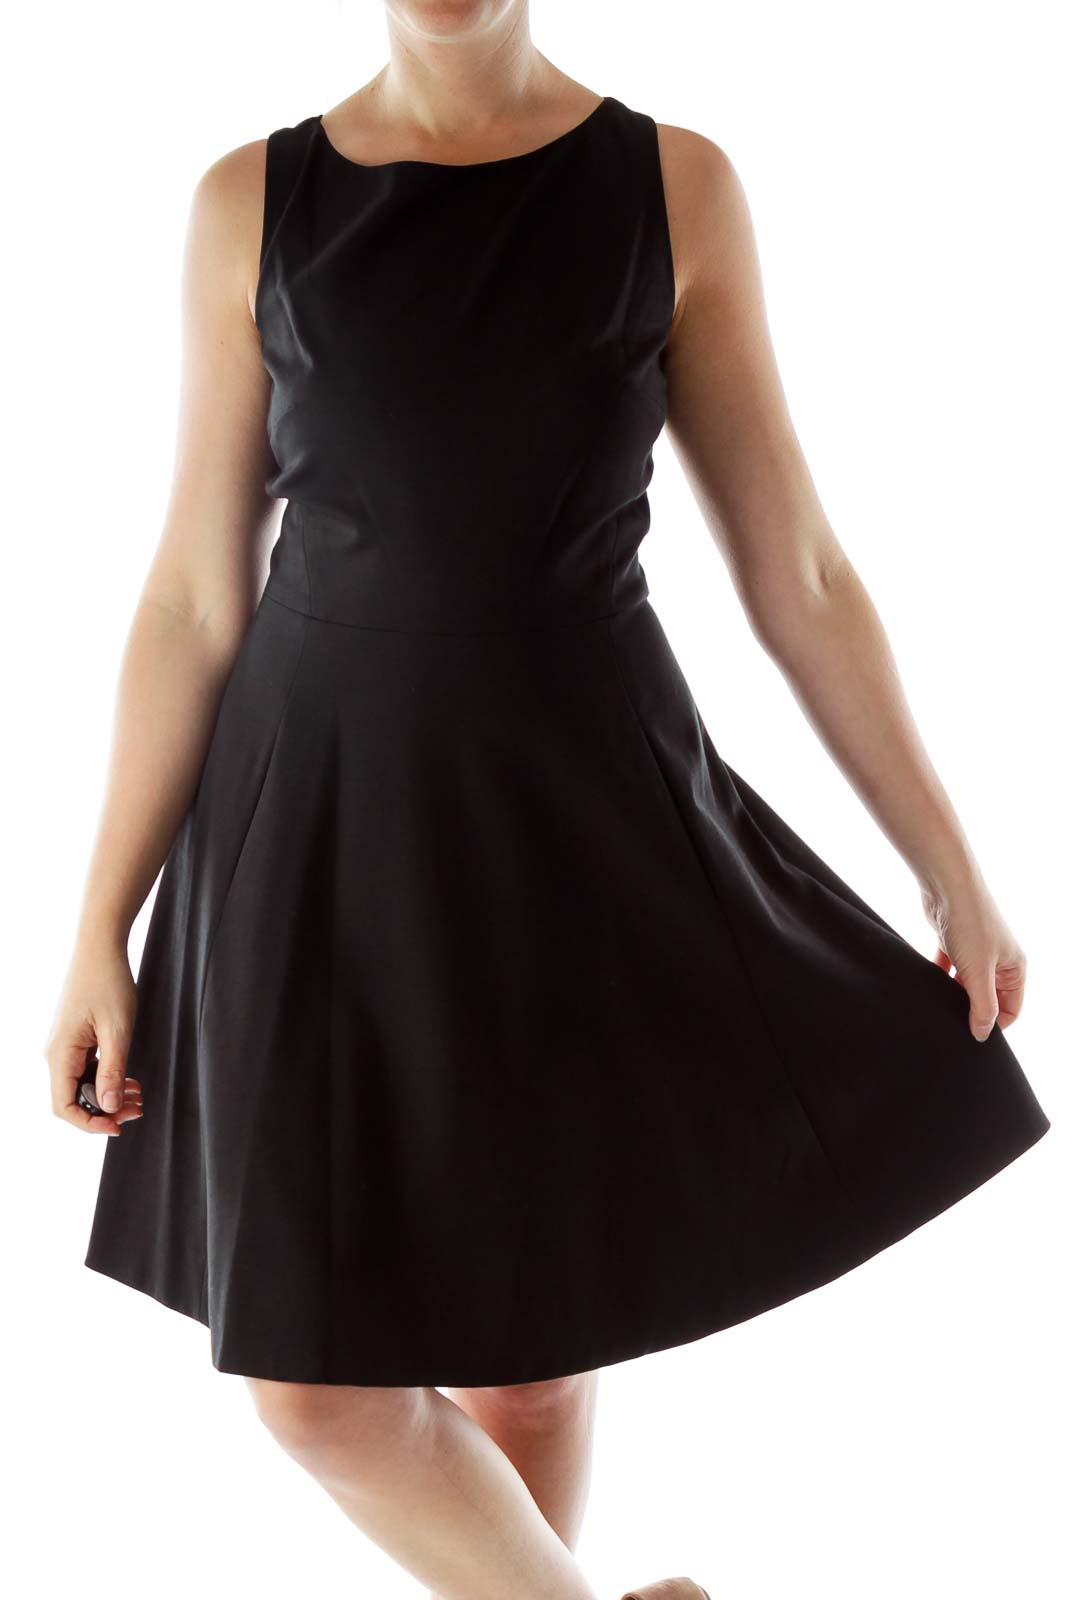 Kate Spade - Black Dress with back Bow detailing Rayon Polyester Viscose |  SilkRoll